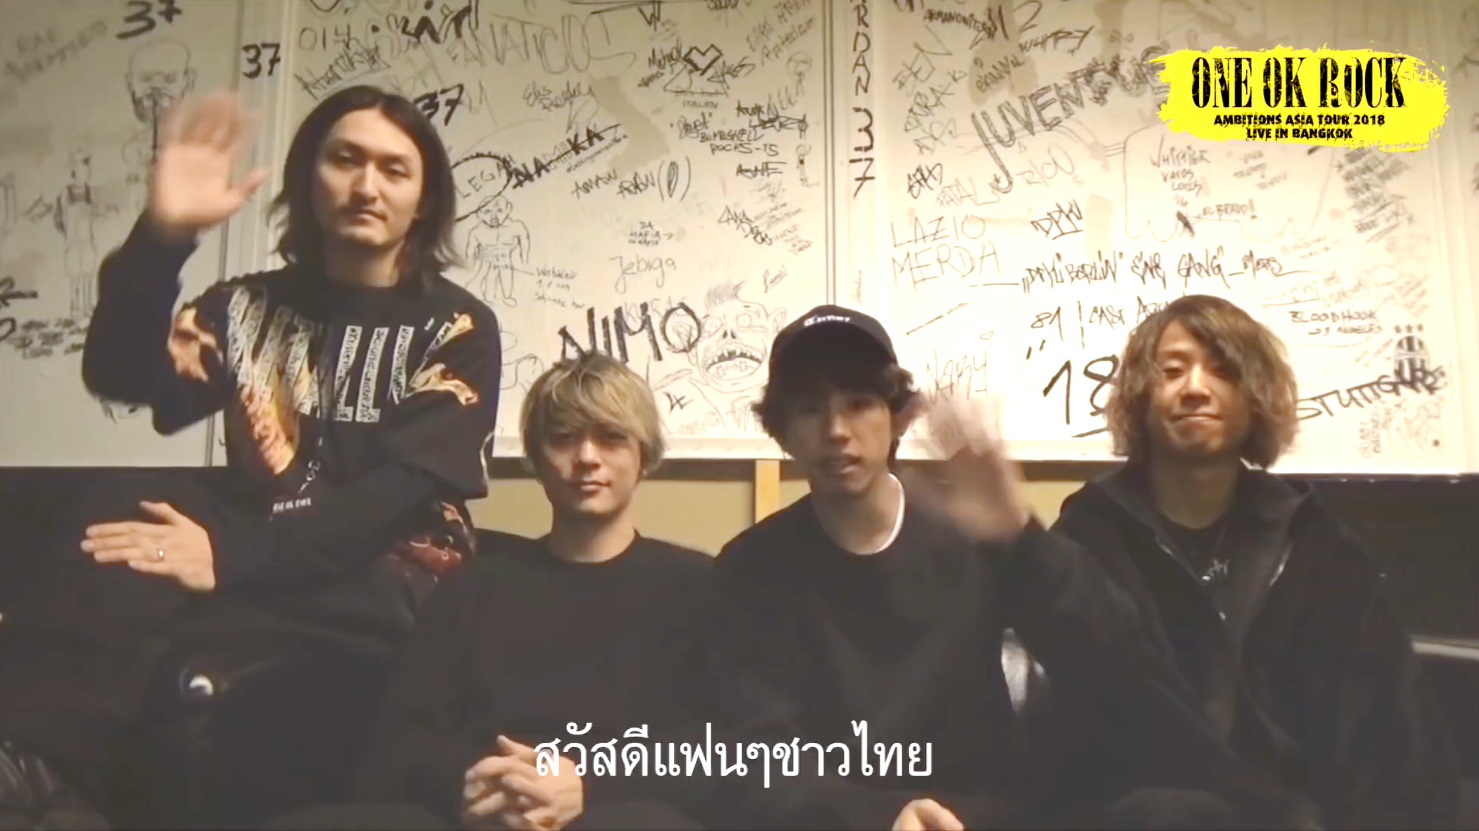 Video Message – ONE OK ROCK AMBITIONS ASIA TOUR 2018 Live in Bangkok by Avalon Live (1)